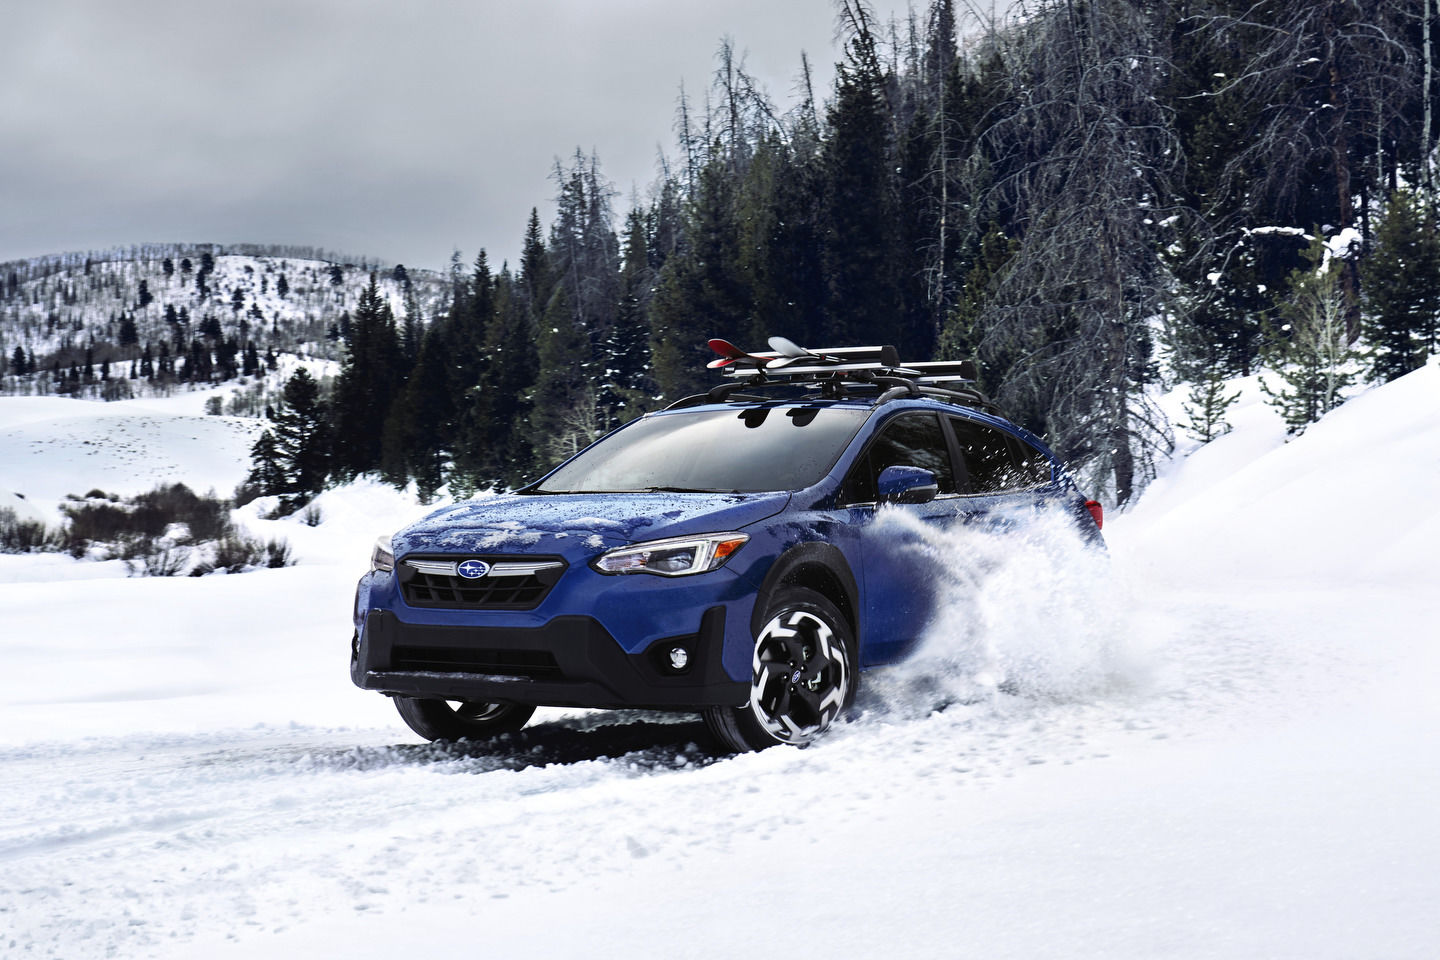 Why the Subaru AWD system is perfect for Québec winter